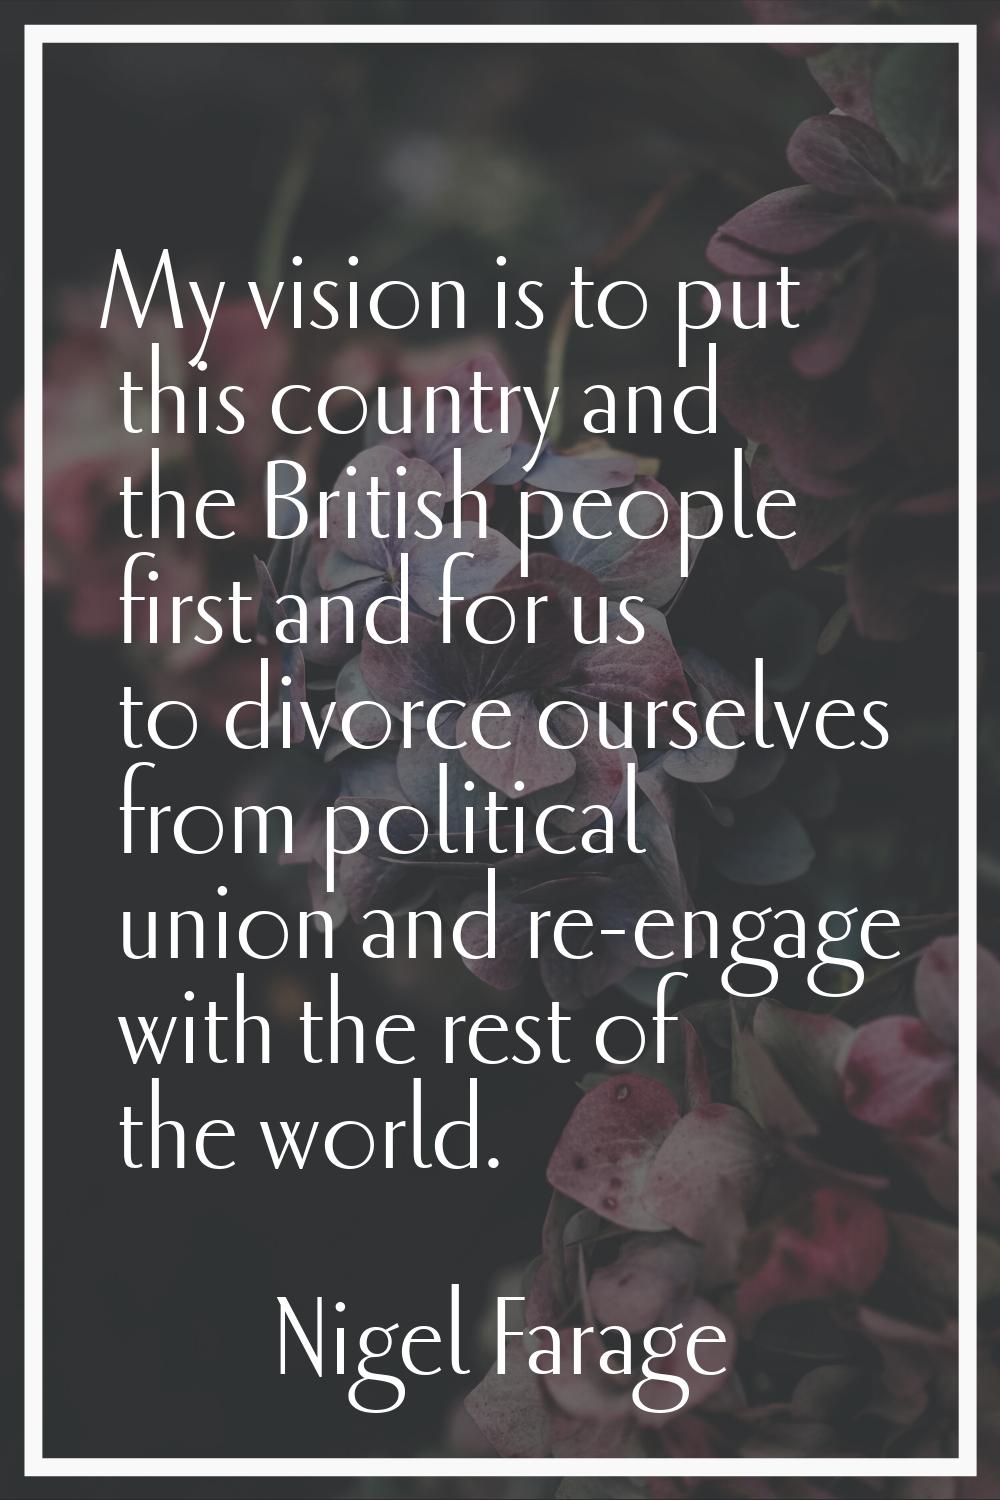 My vision is to put this country and the British people first and for us to divorce ourselves from 